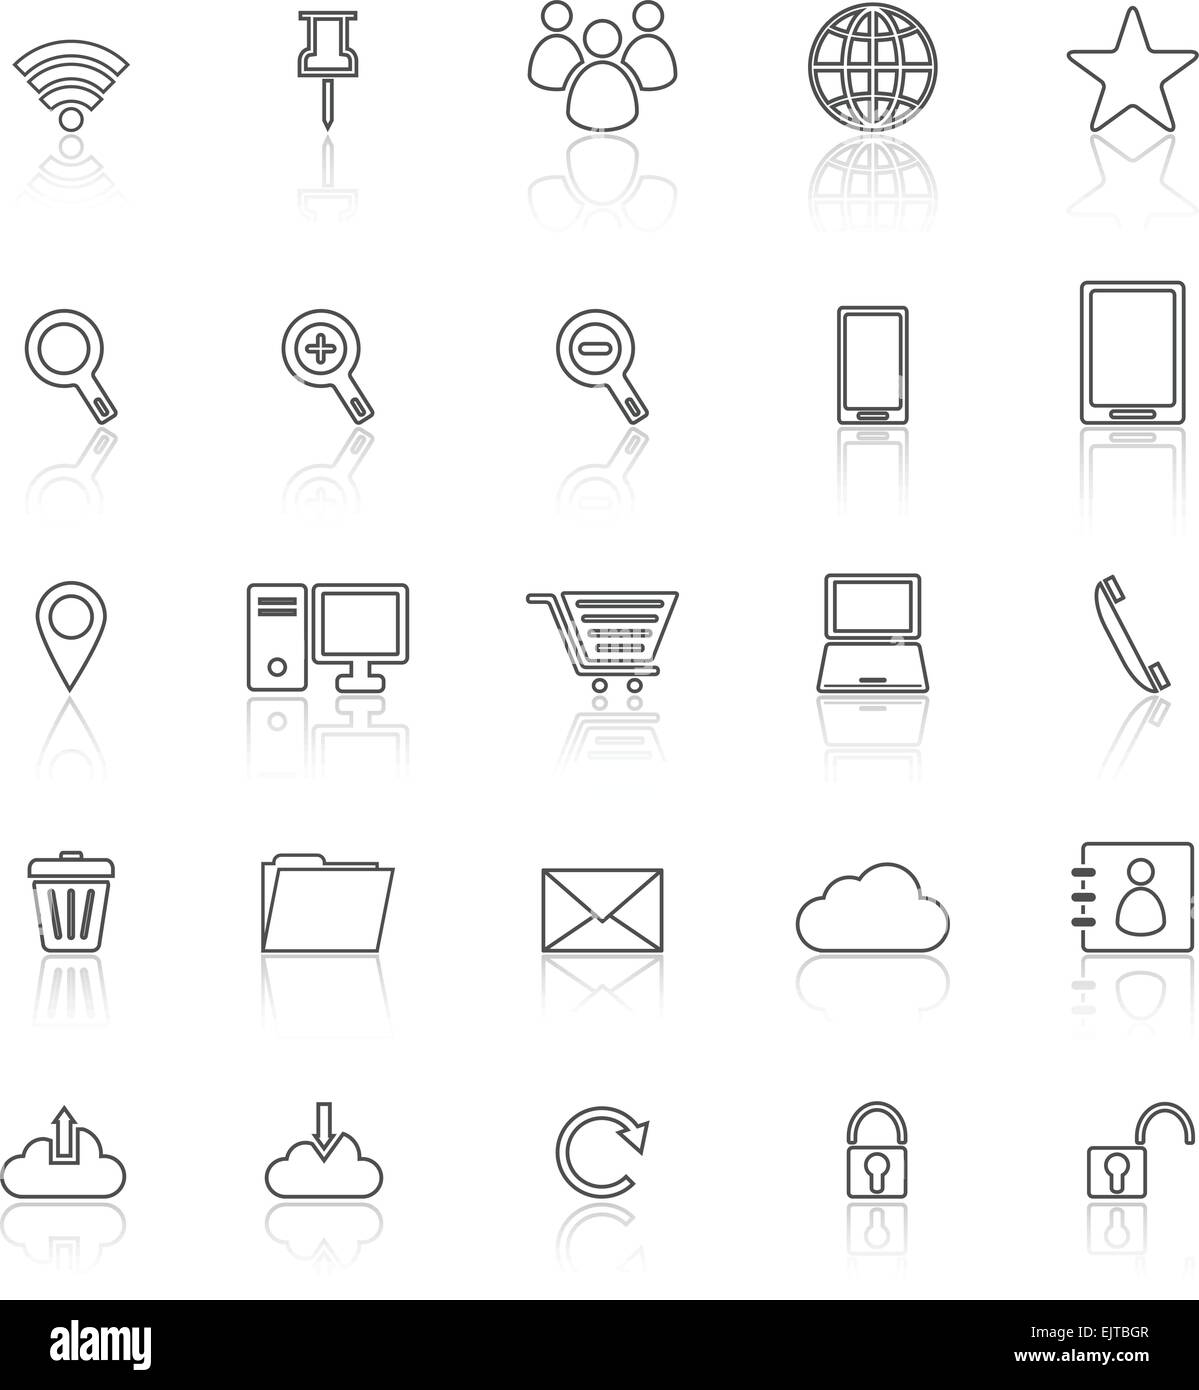 Internet line icons with reflect on white background, stock vector Stock Vector